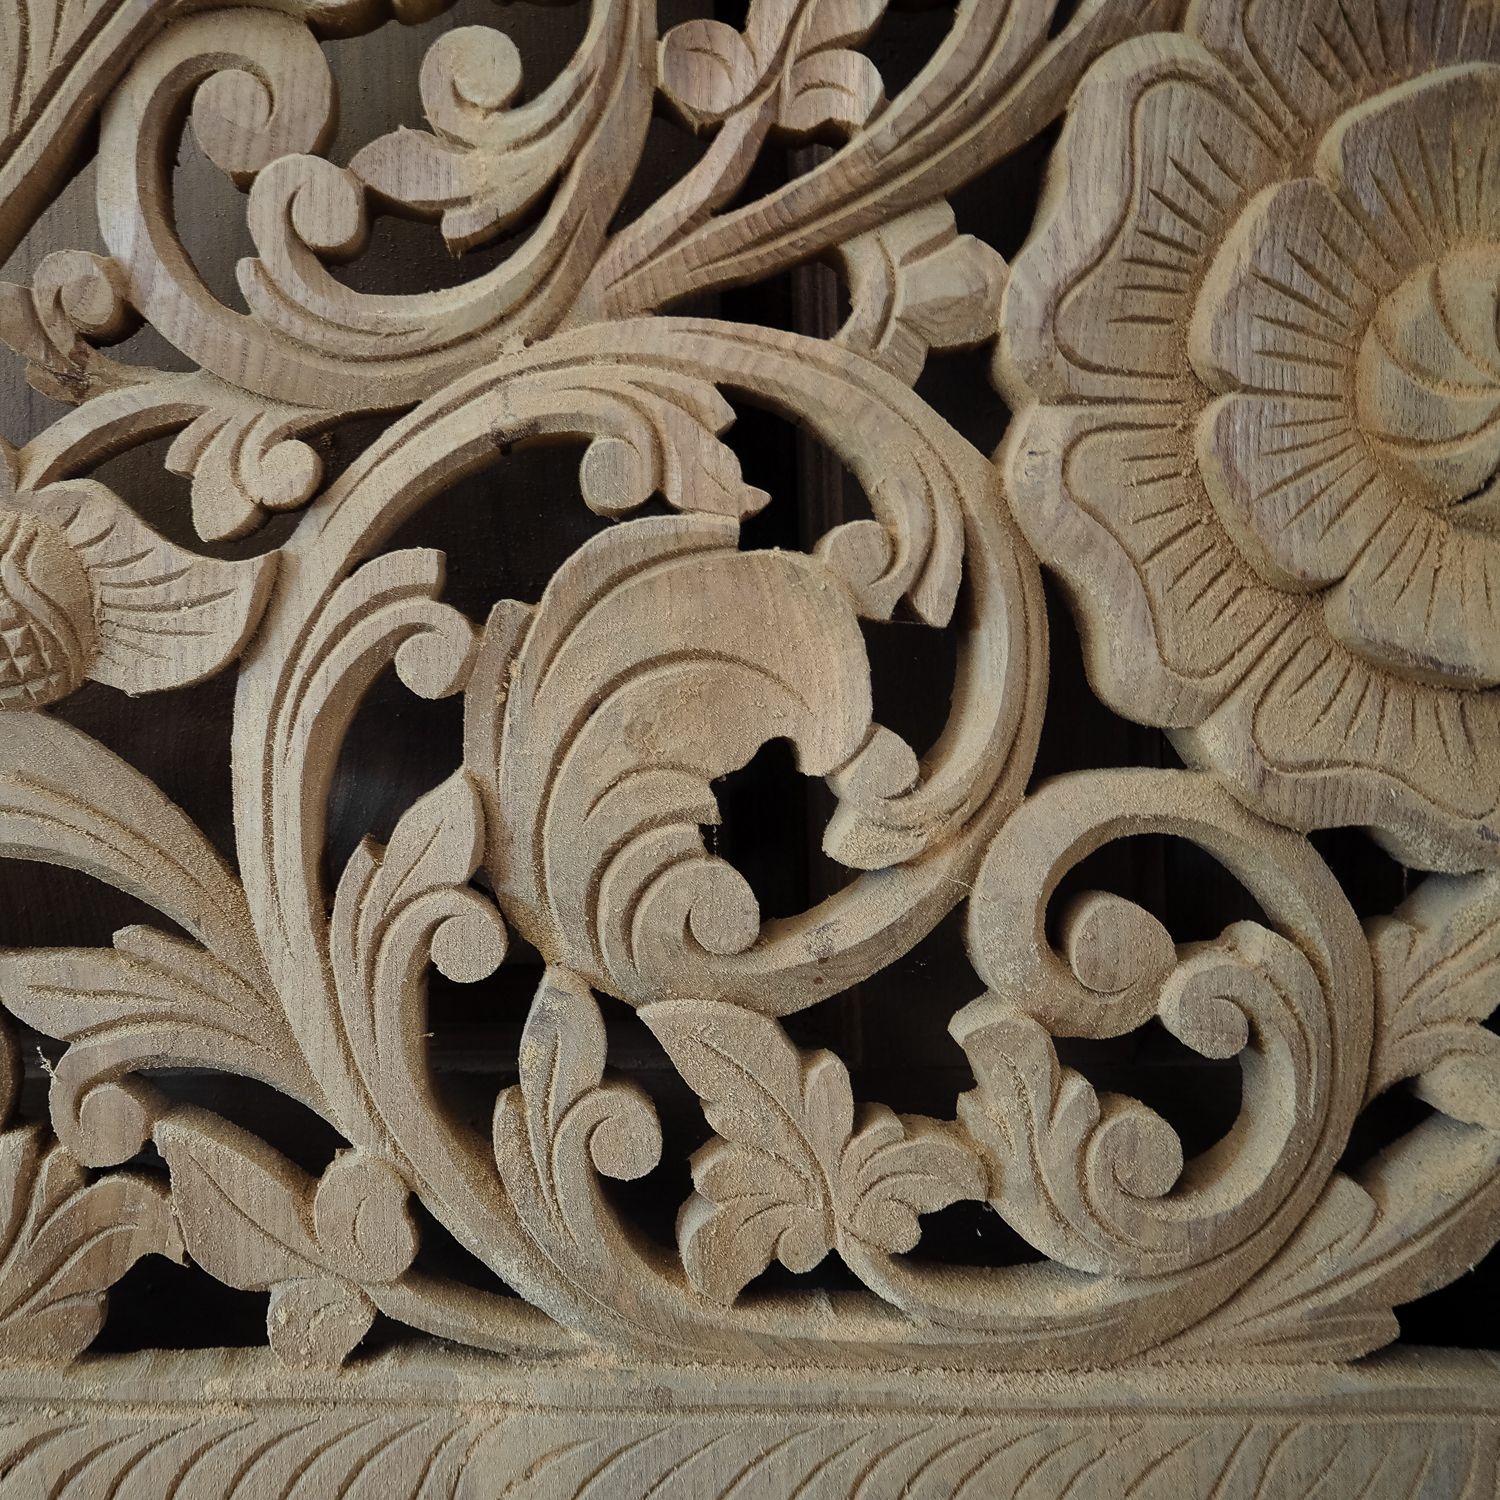 Buy Carved Bed Panel Oriental Wall Art Decor, Carved Wood Inside Best And Newest Landscape Wood Wall Art (View 10 of 20)